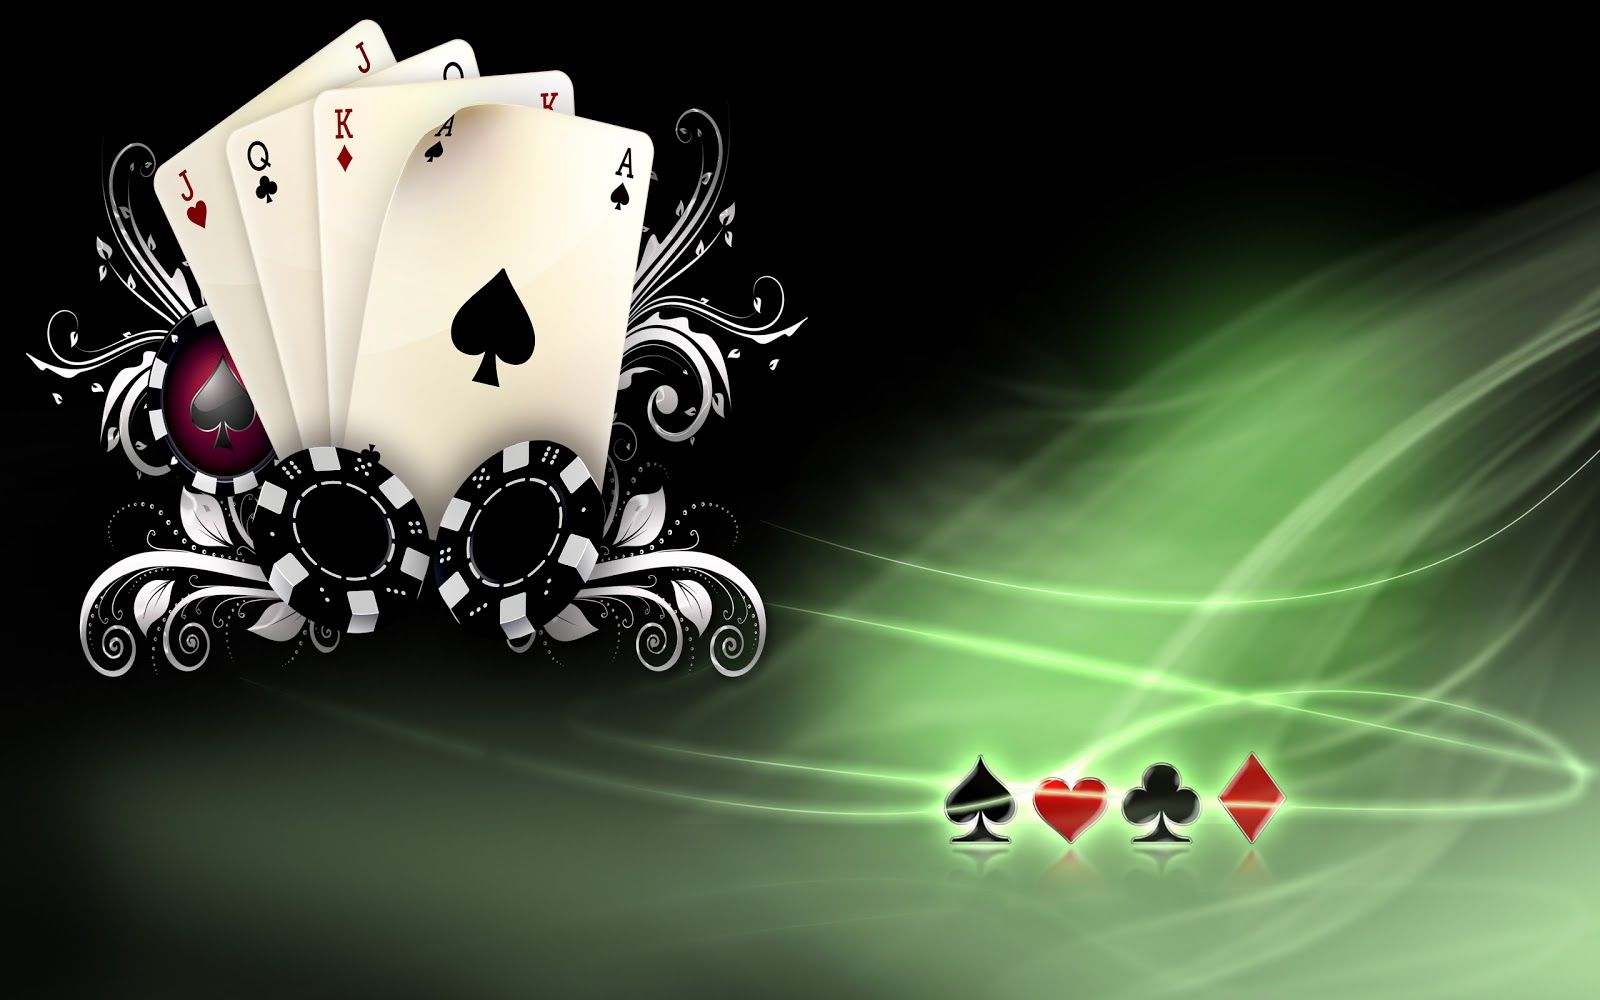 Mastering the Hold’em Craft: Private Poker Communities